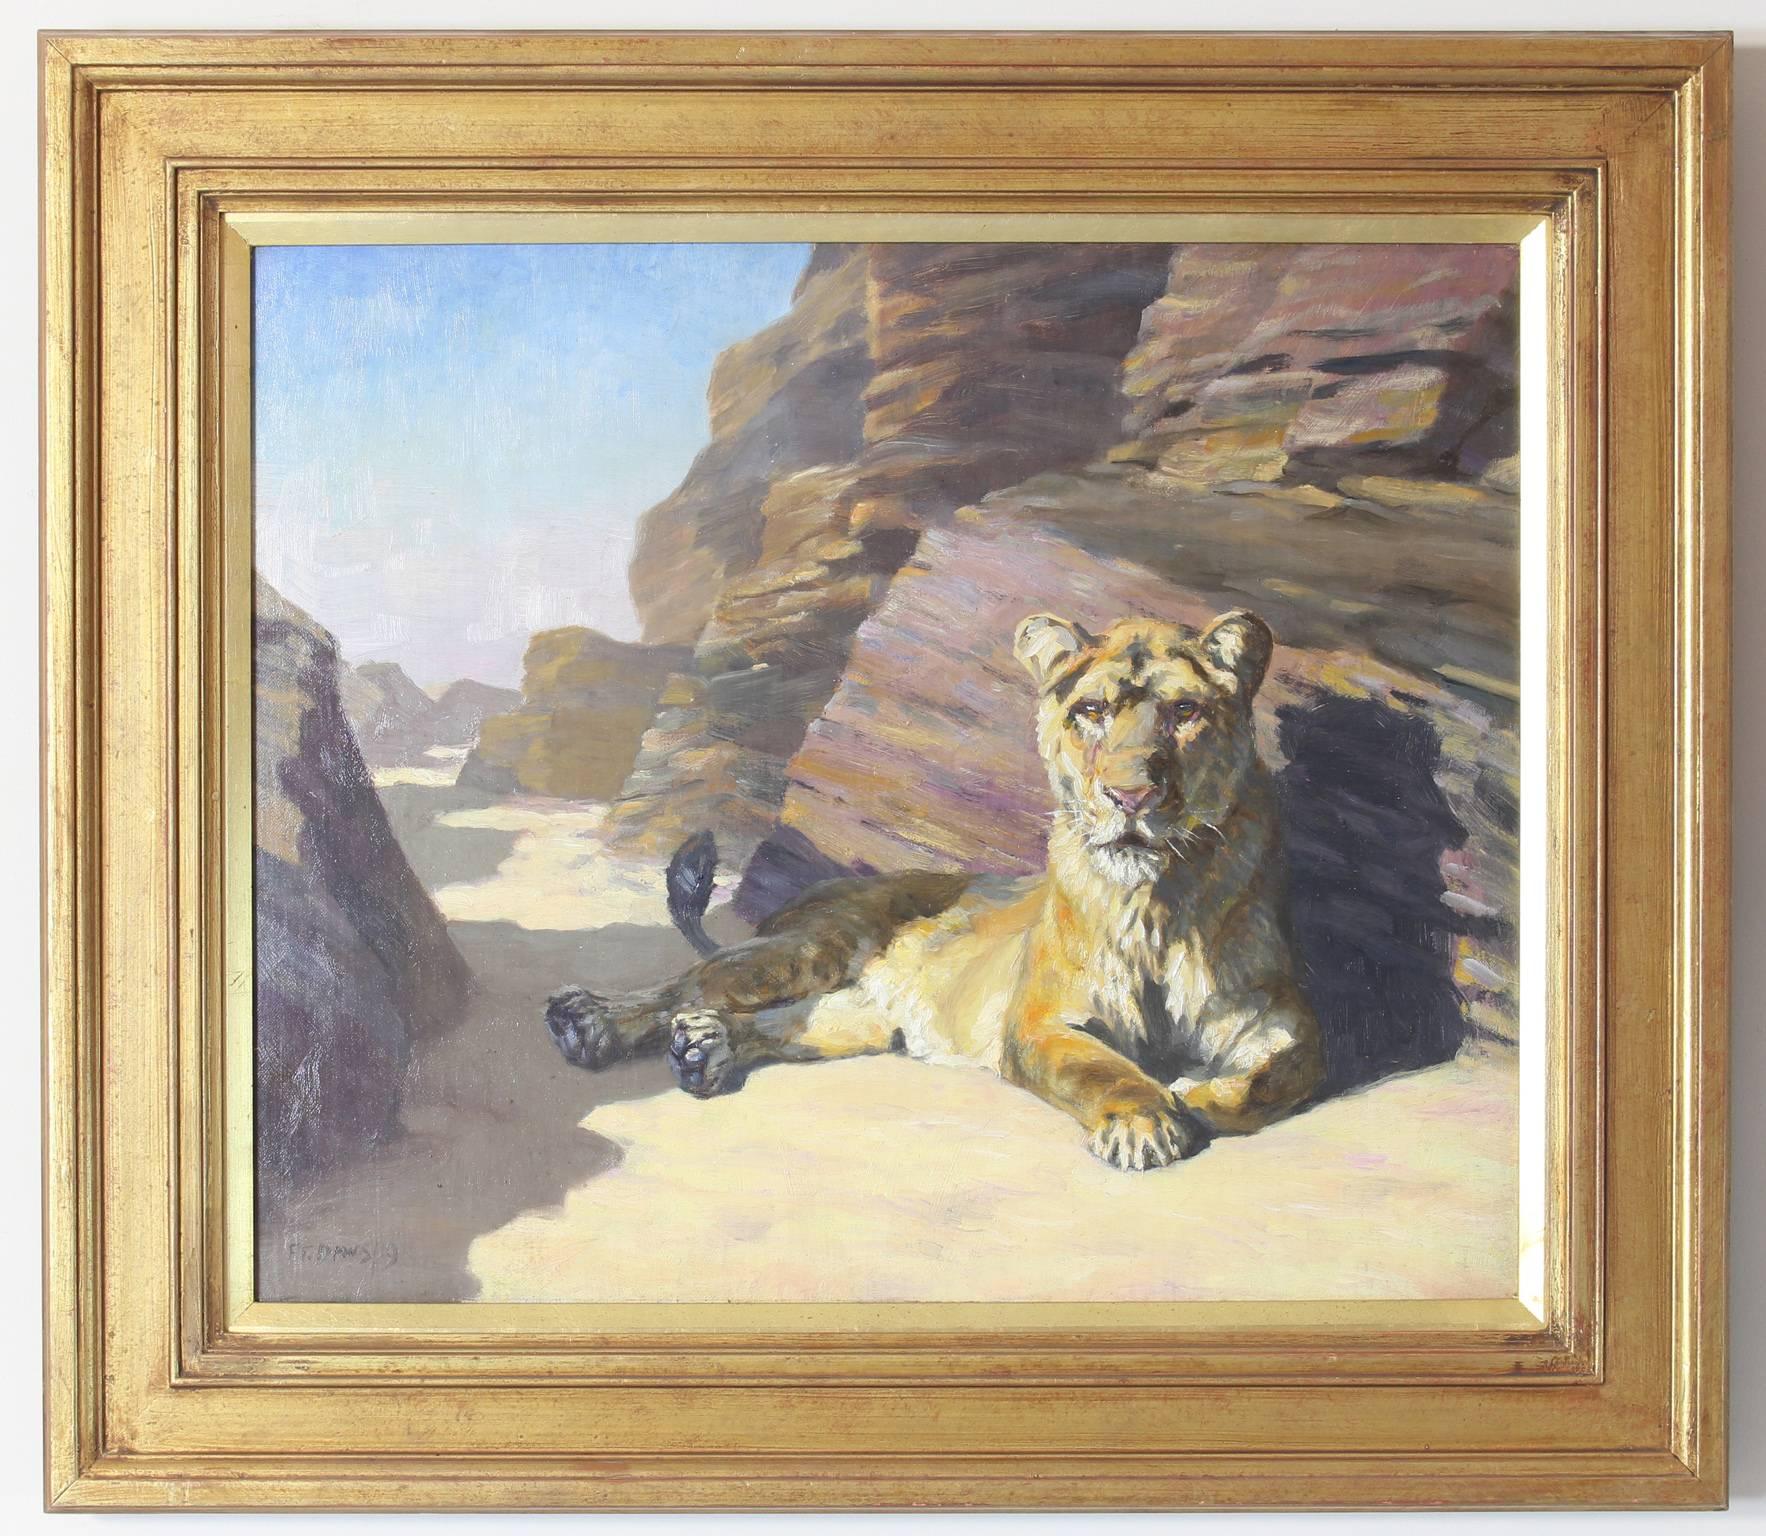 An early 20th century English oil on canvas painting of a female lion in a rocky landscape by F. T. Daws. Signed and dated lower left, set in gold wood frame.